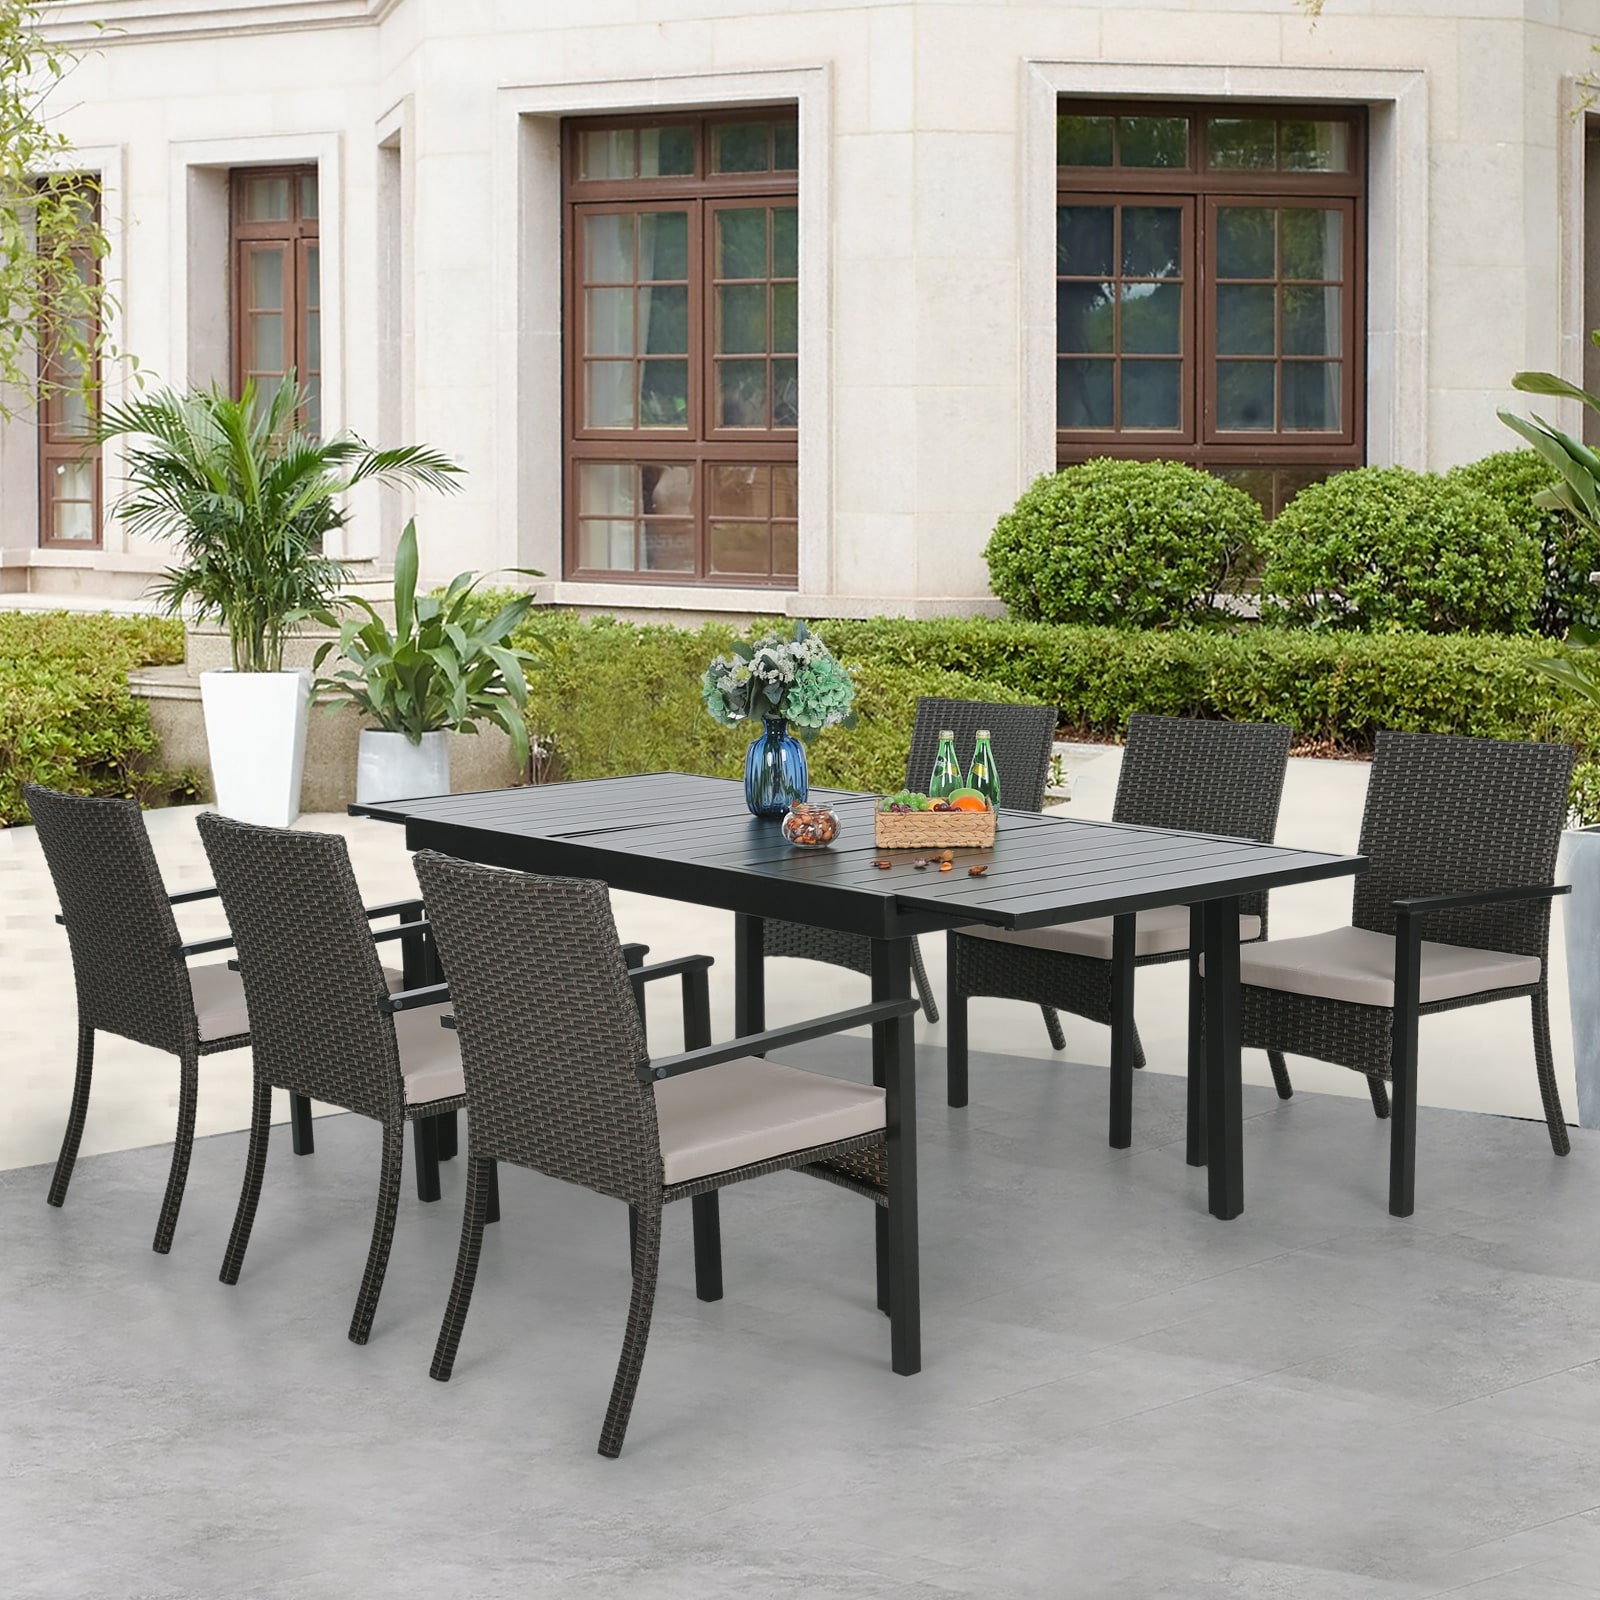 7/9-piece Extendable Table and Rattan Cushion Dining Chairs Outdoor Patio Dining Set